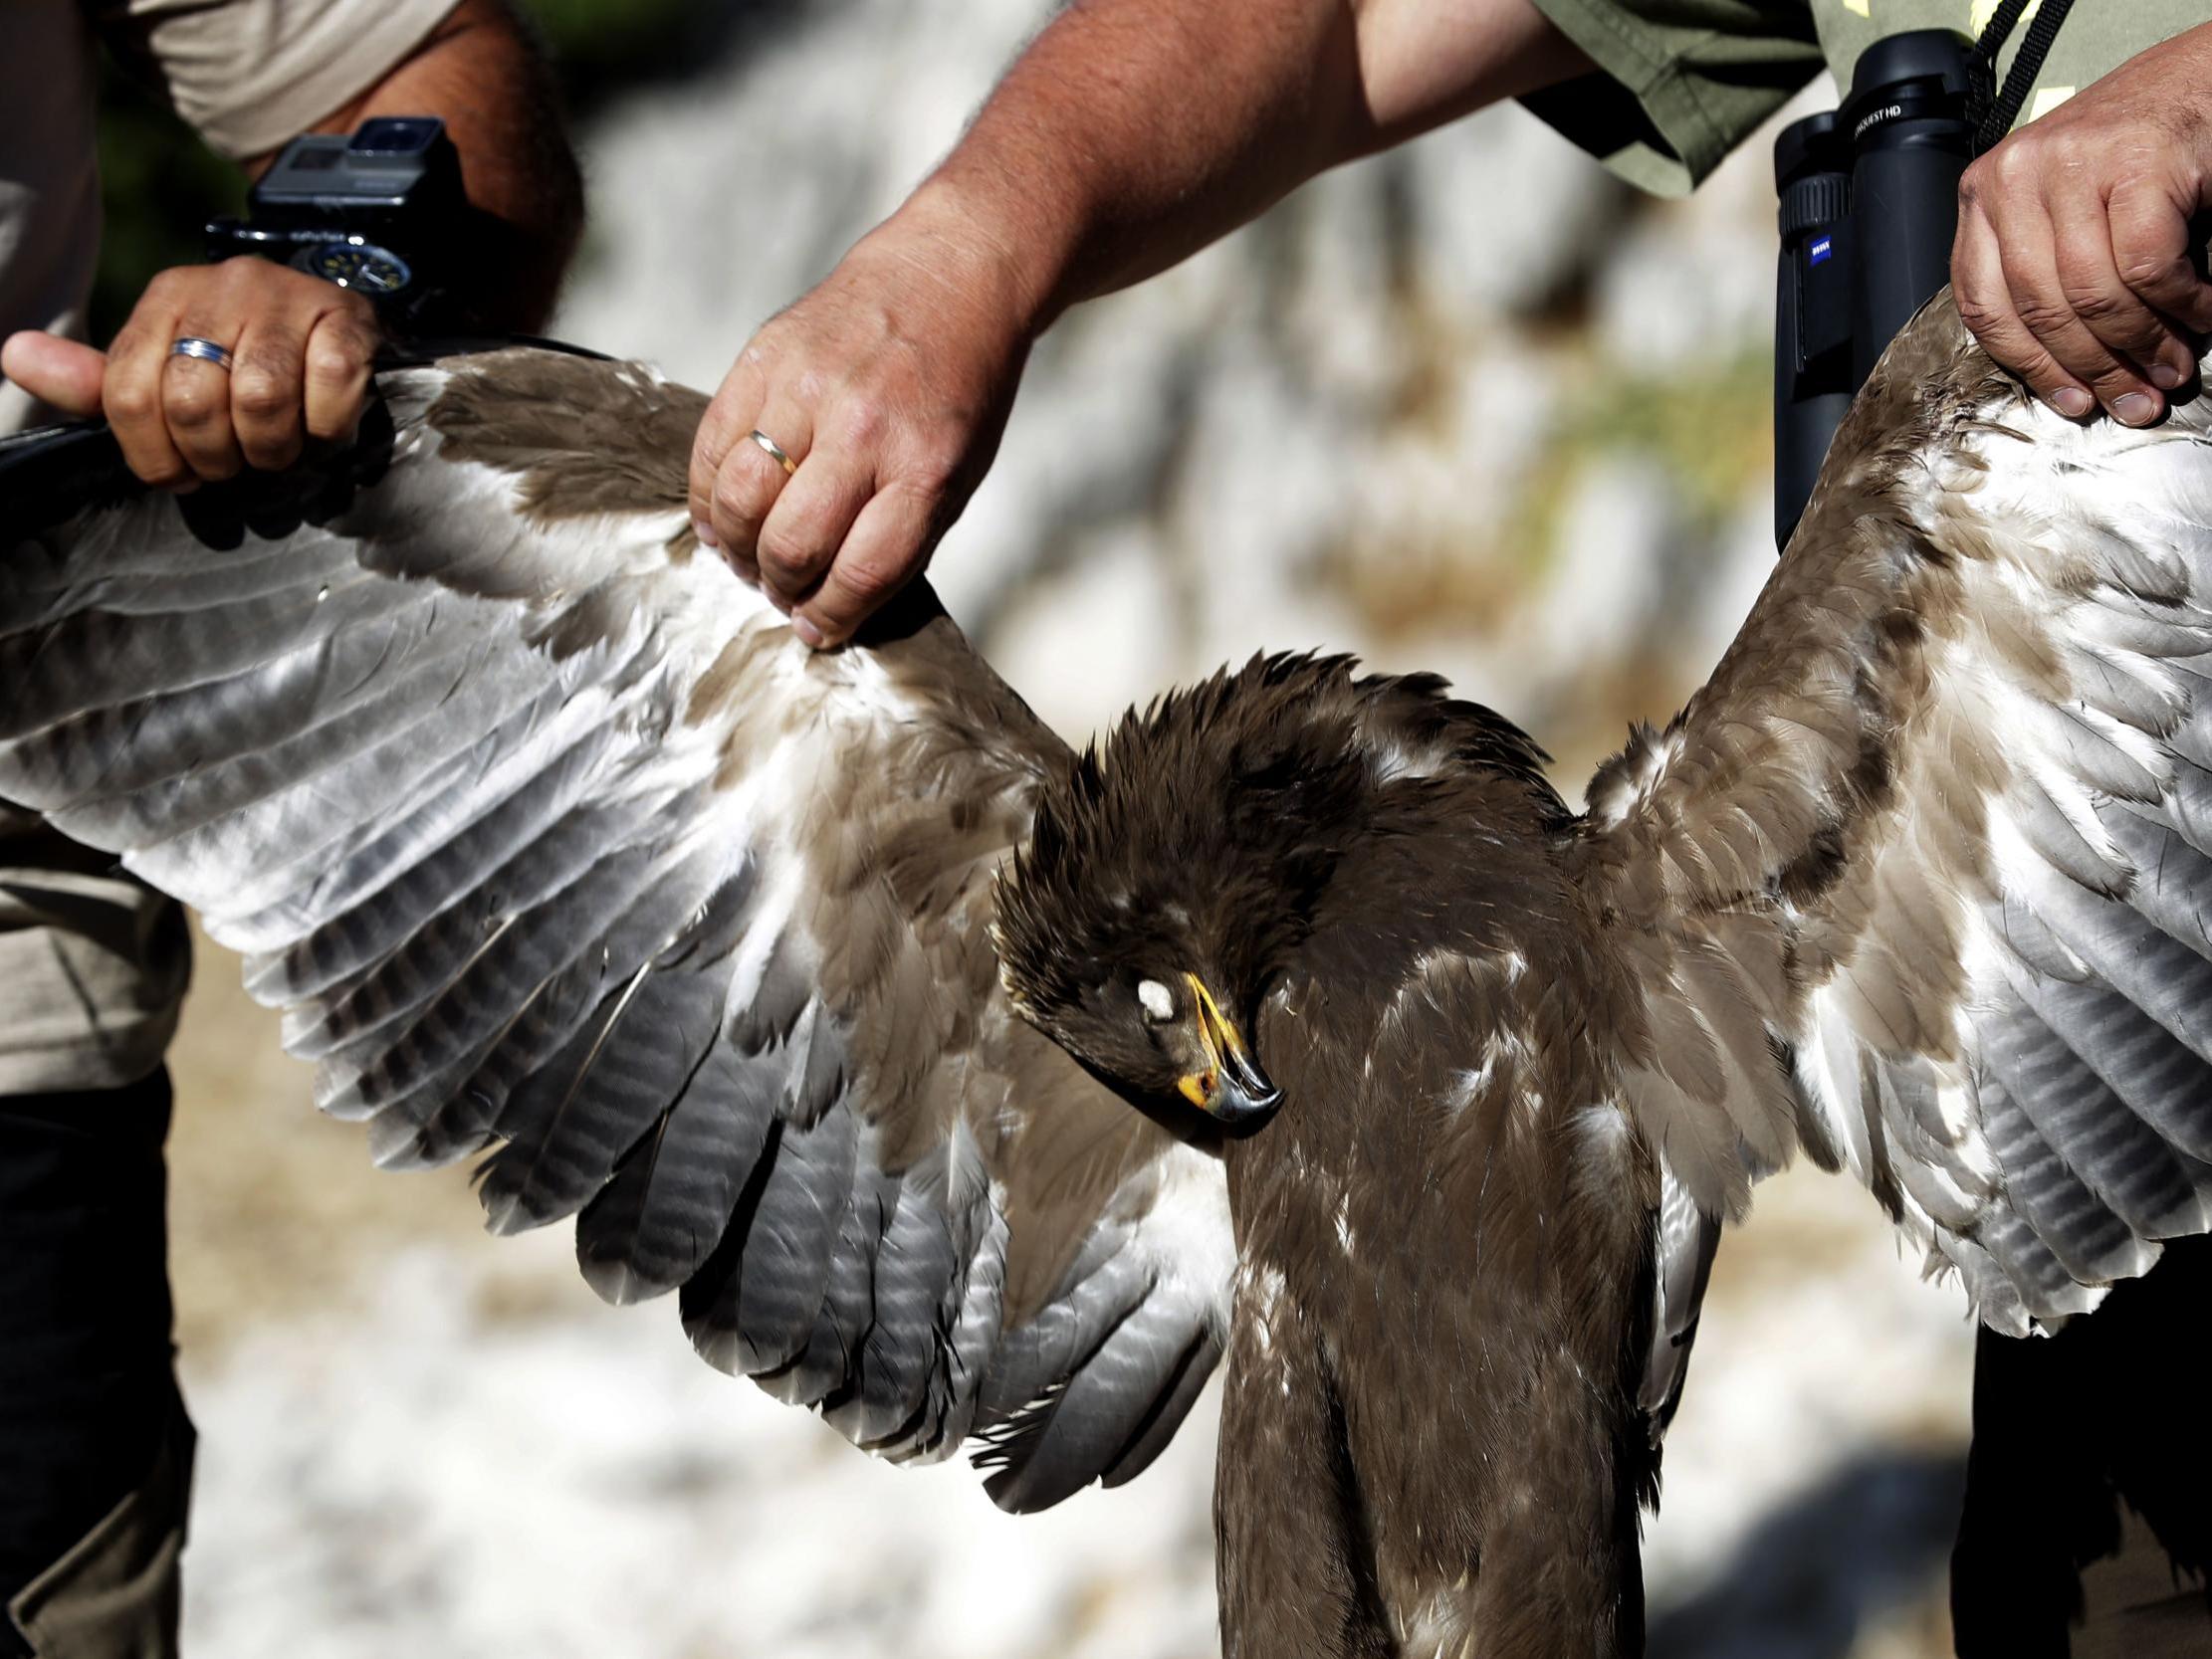 Activists are using Islamic traditions to help save birds in Lebanon 